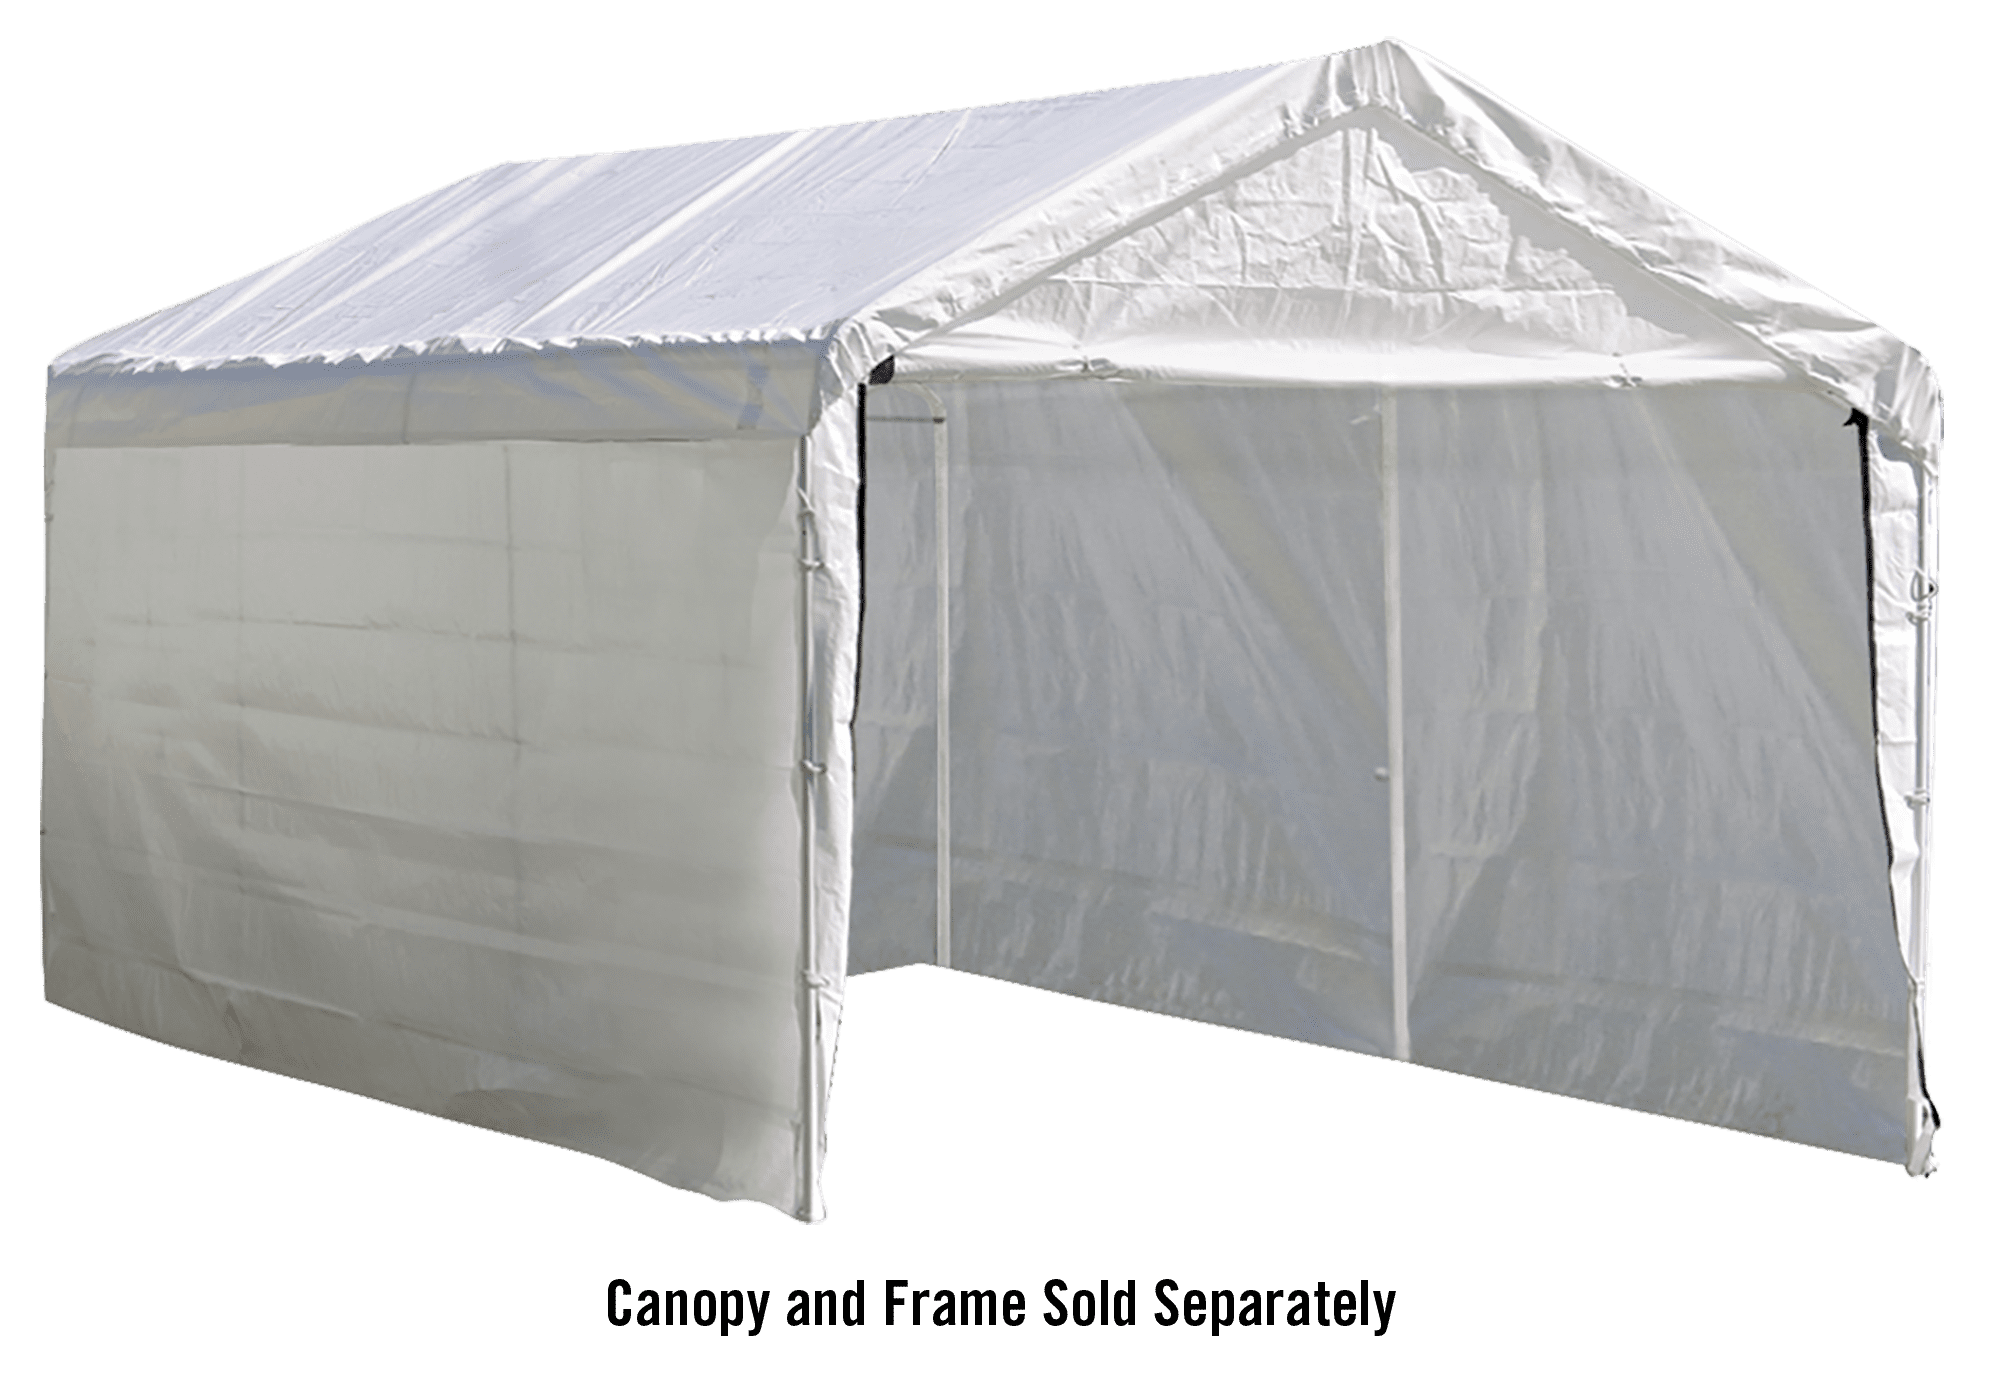 ABCCANOPY 15+Colors 10 Sun Wall for 10x 10 Straight Leg pop up Canopy Beige 1 Panel with Truss Straps 10 Sidewall kit